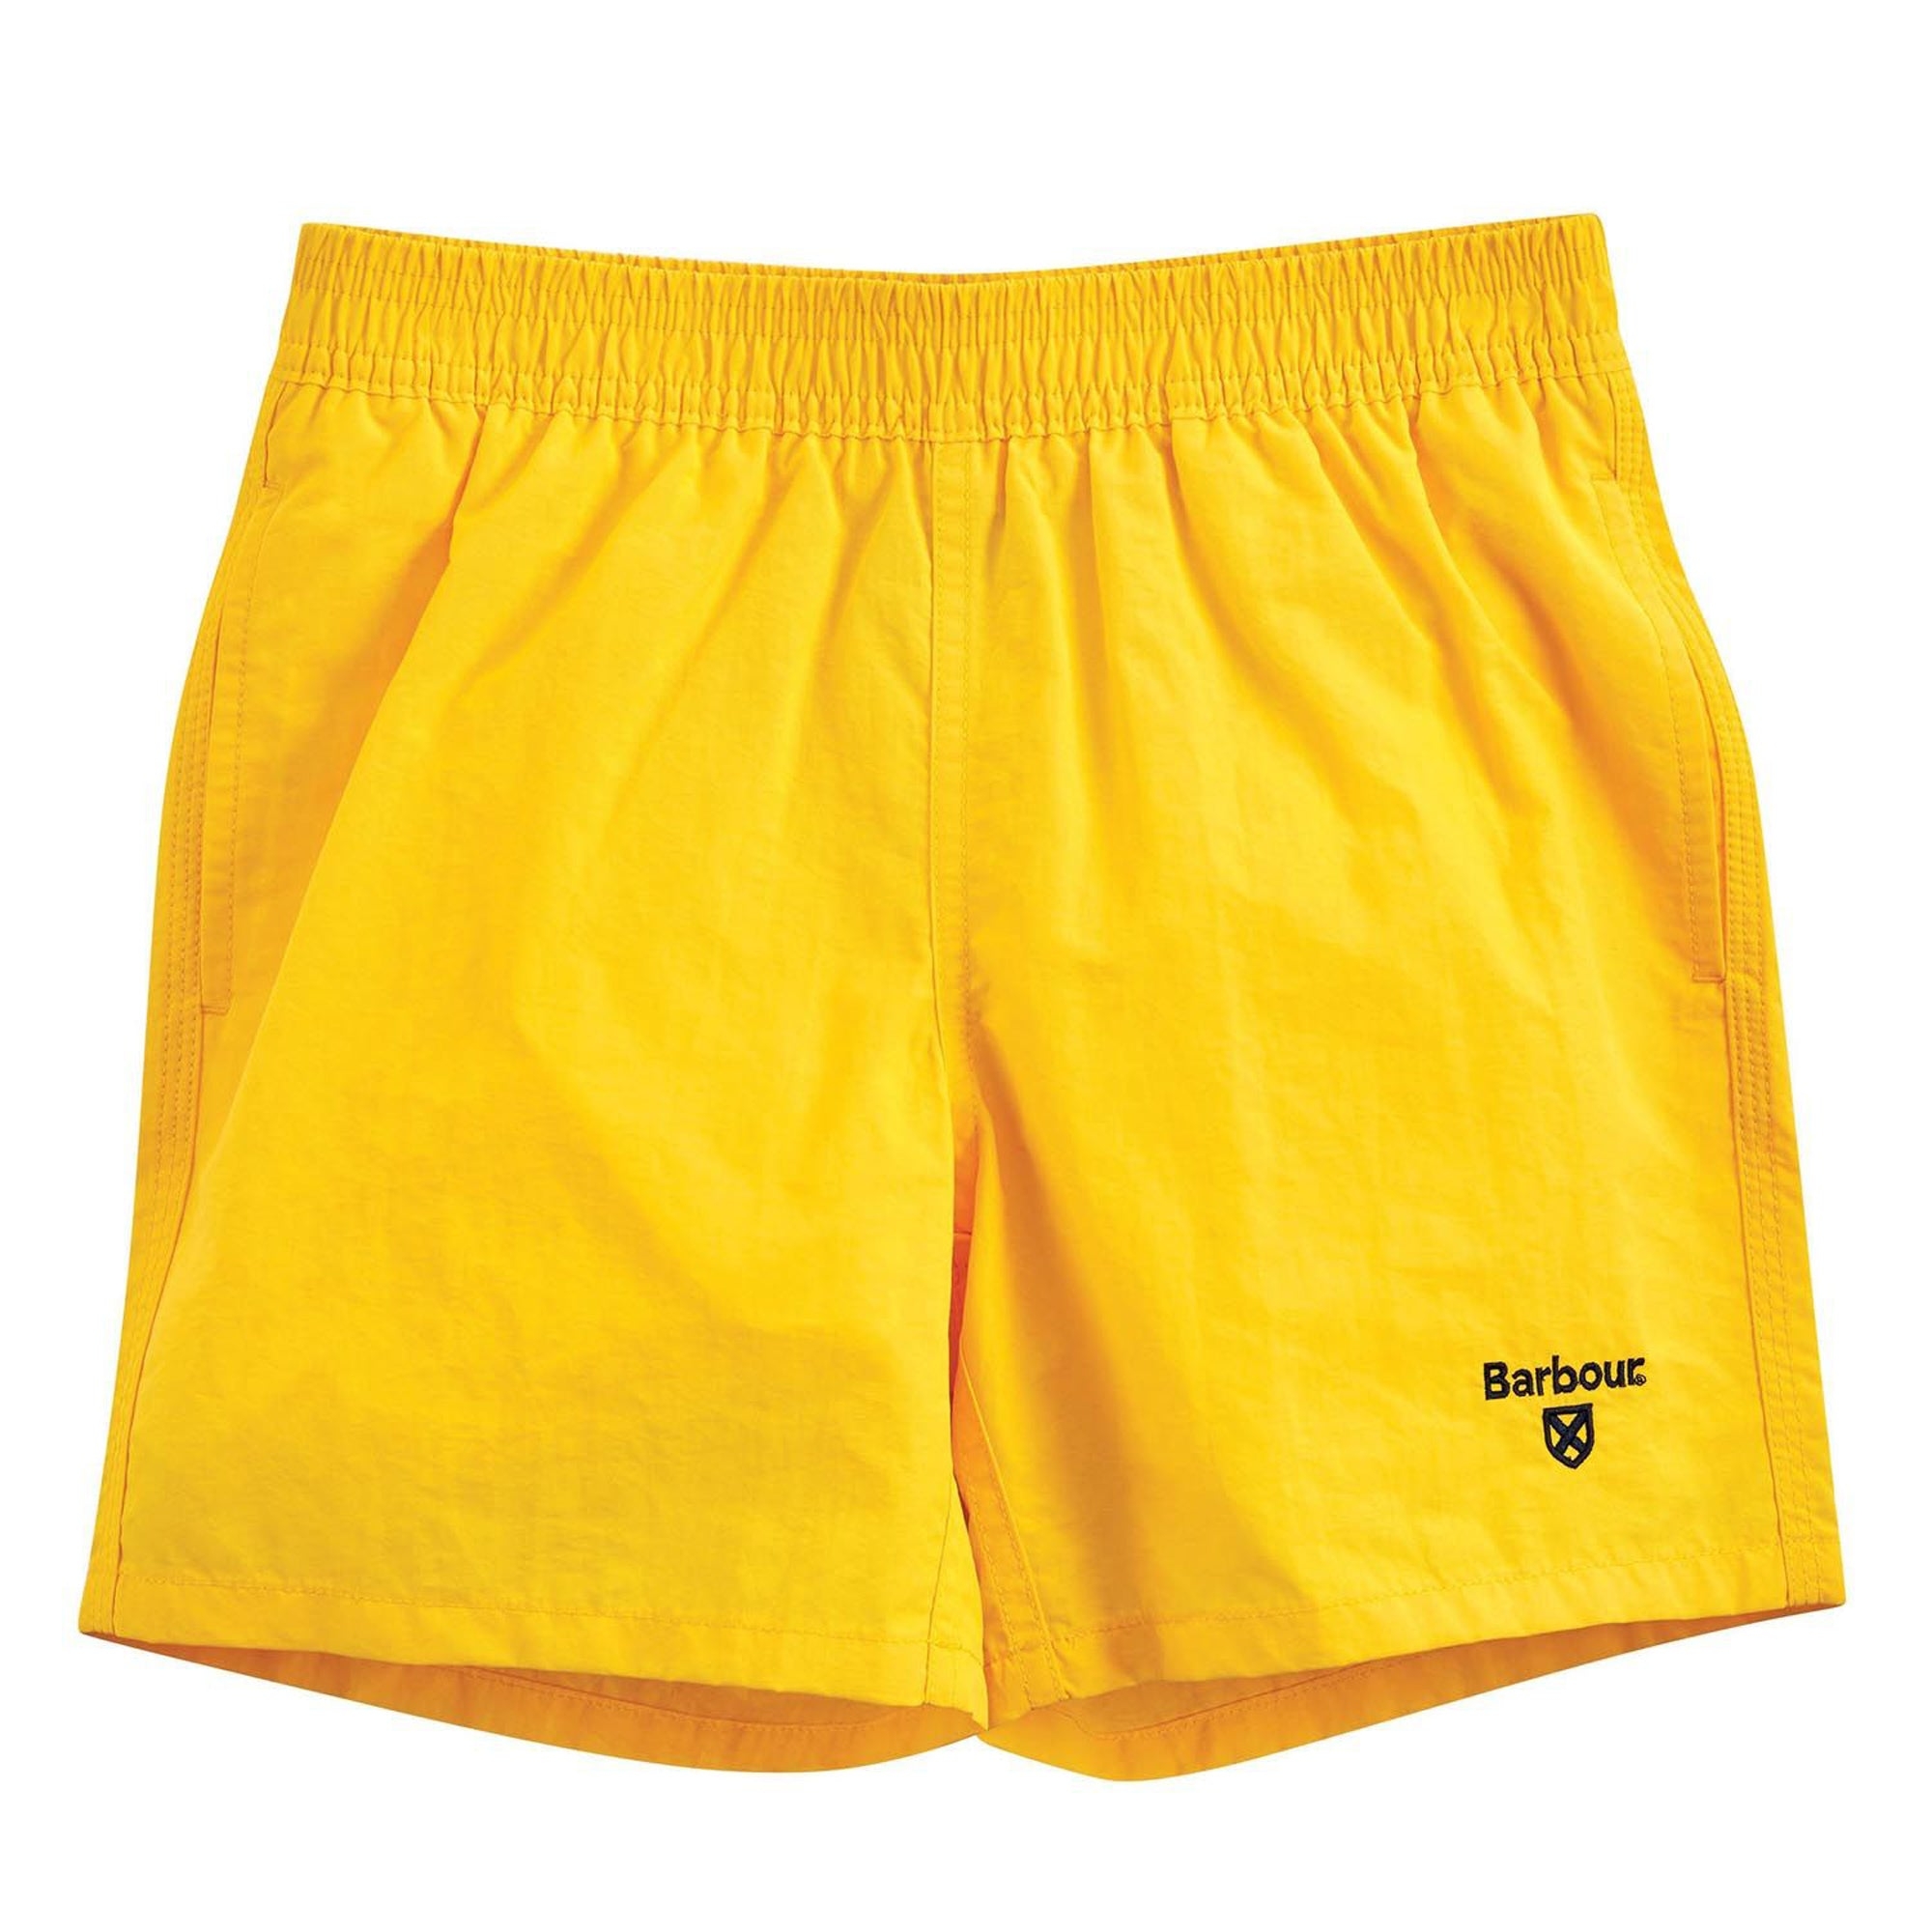 barbour kids barbour bambino shorts mare giallo in nylon